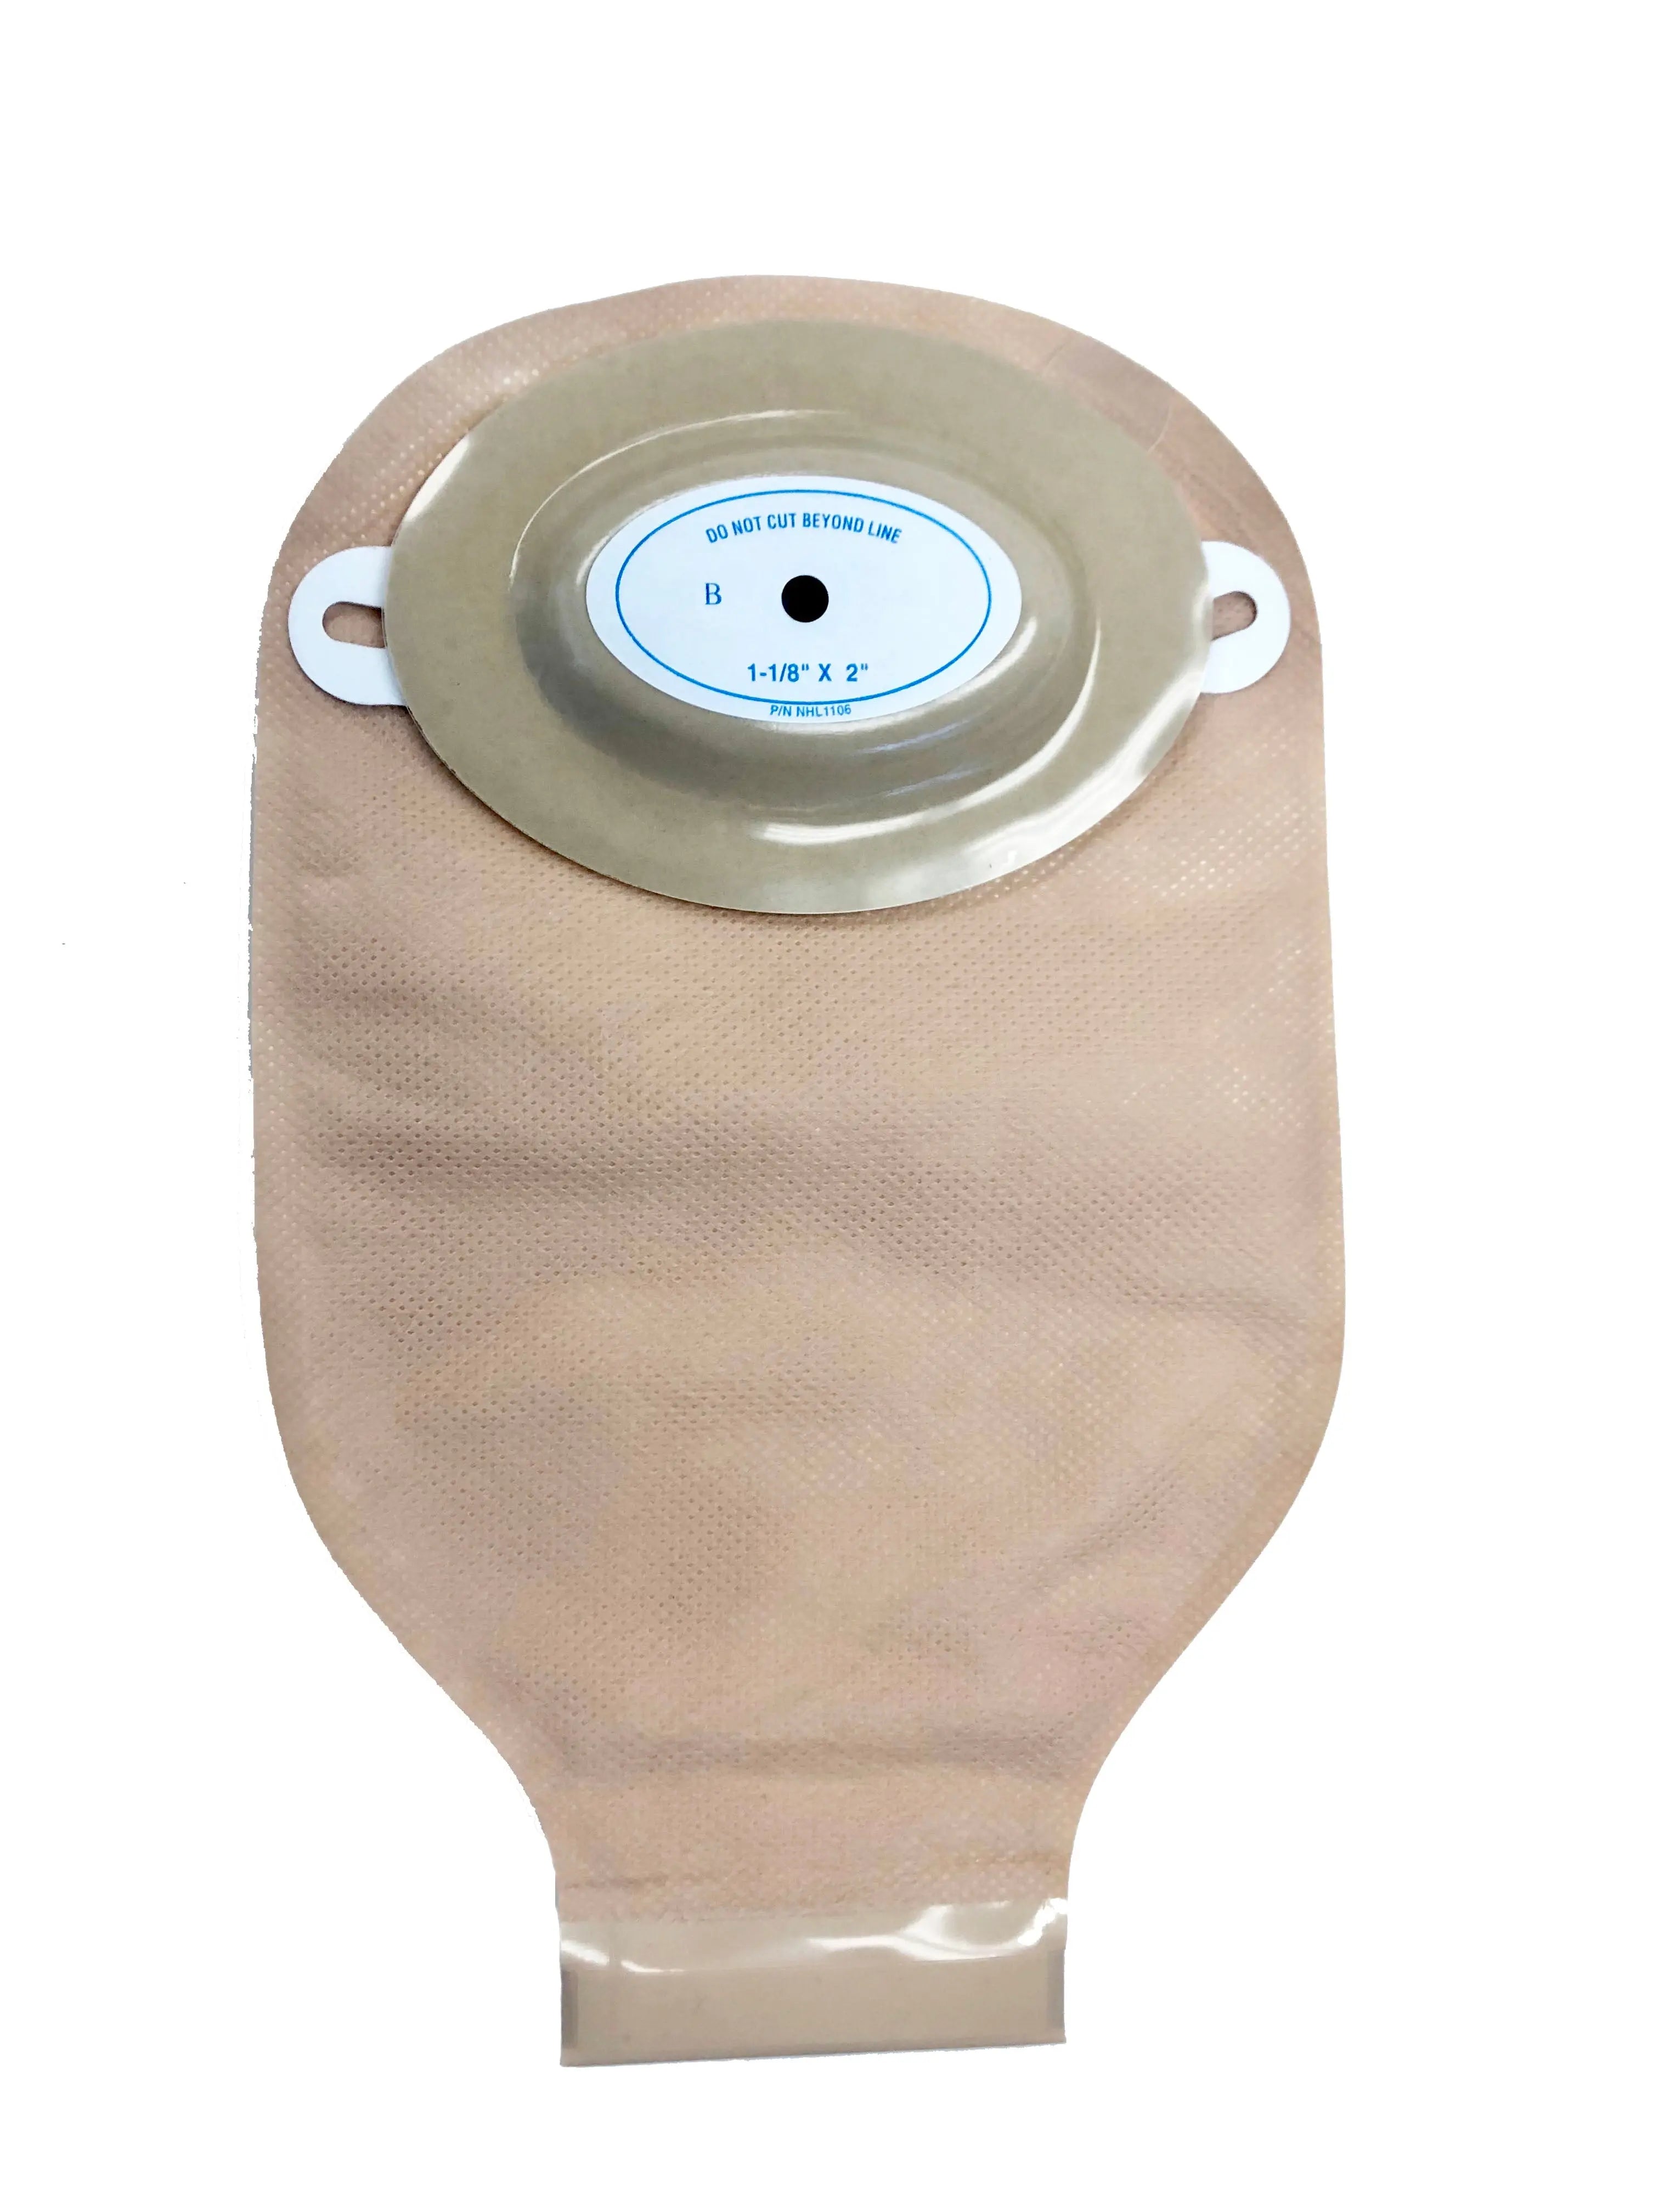 Nu-Flex Post-Op 24oz Drainable Pouch W/ Roll-Up Closure A(3/4" X 1 1/2") Oval Adhesive Foam Pad W/ Convex - Box Of 10